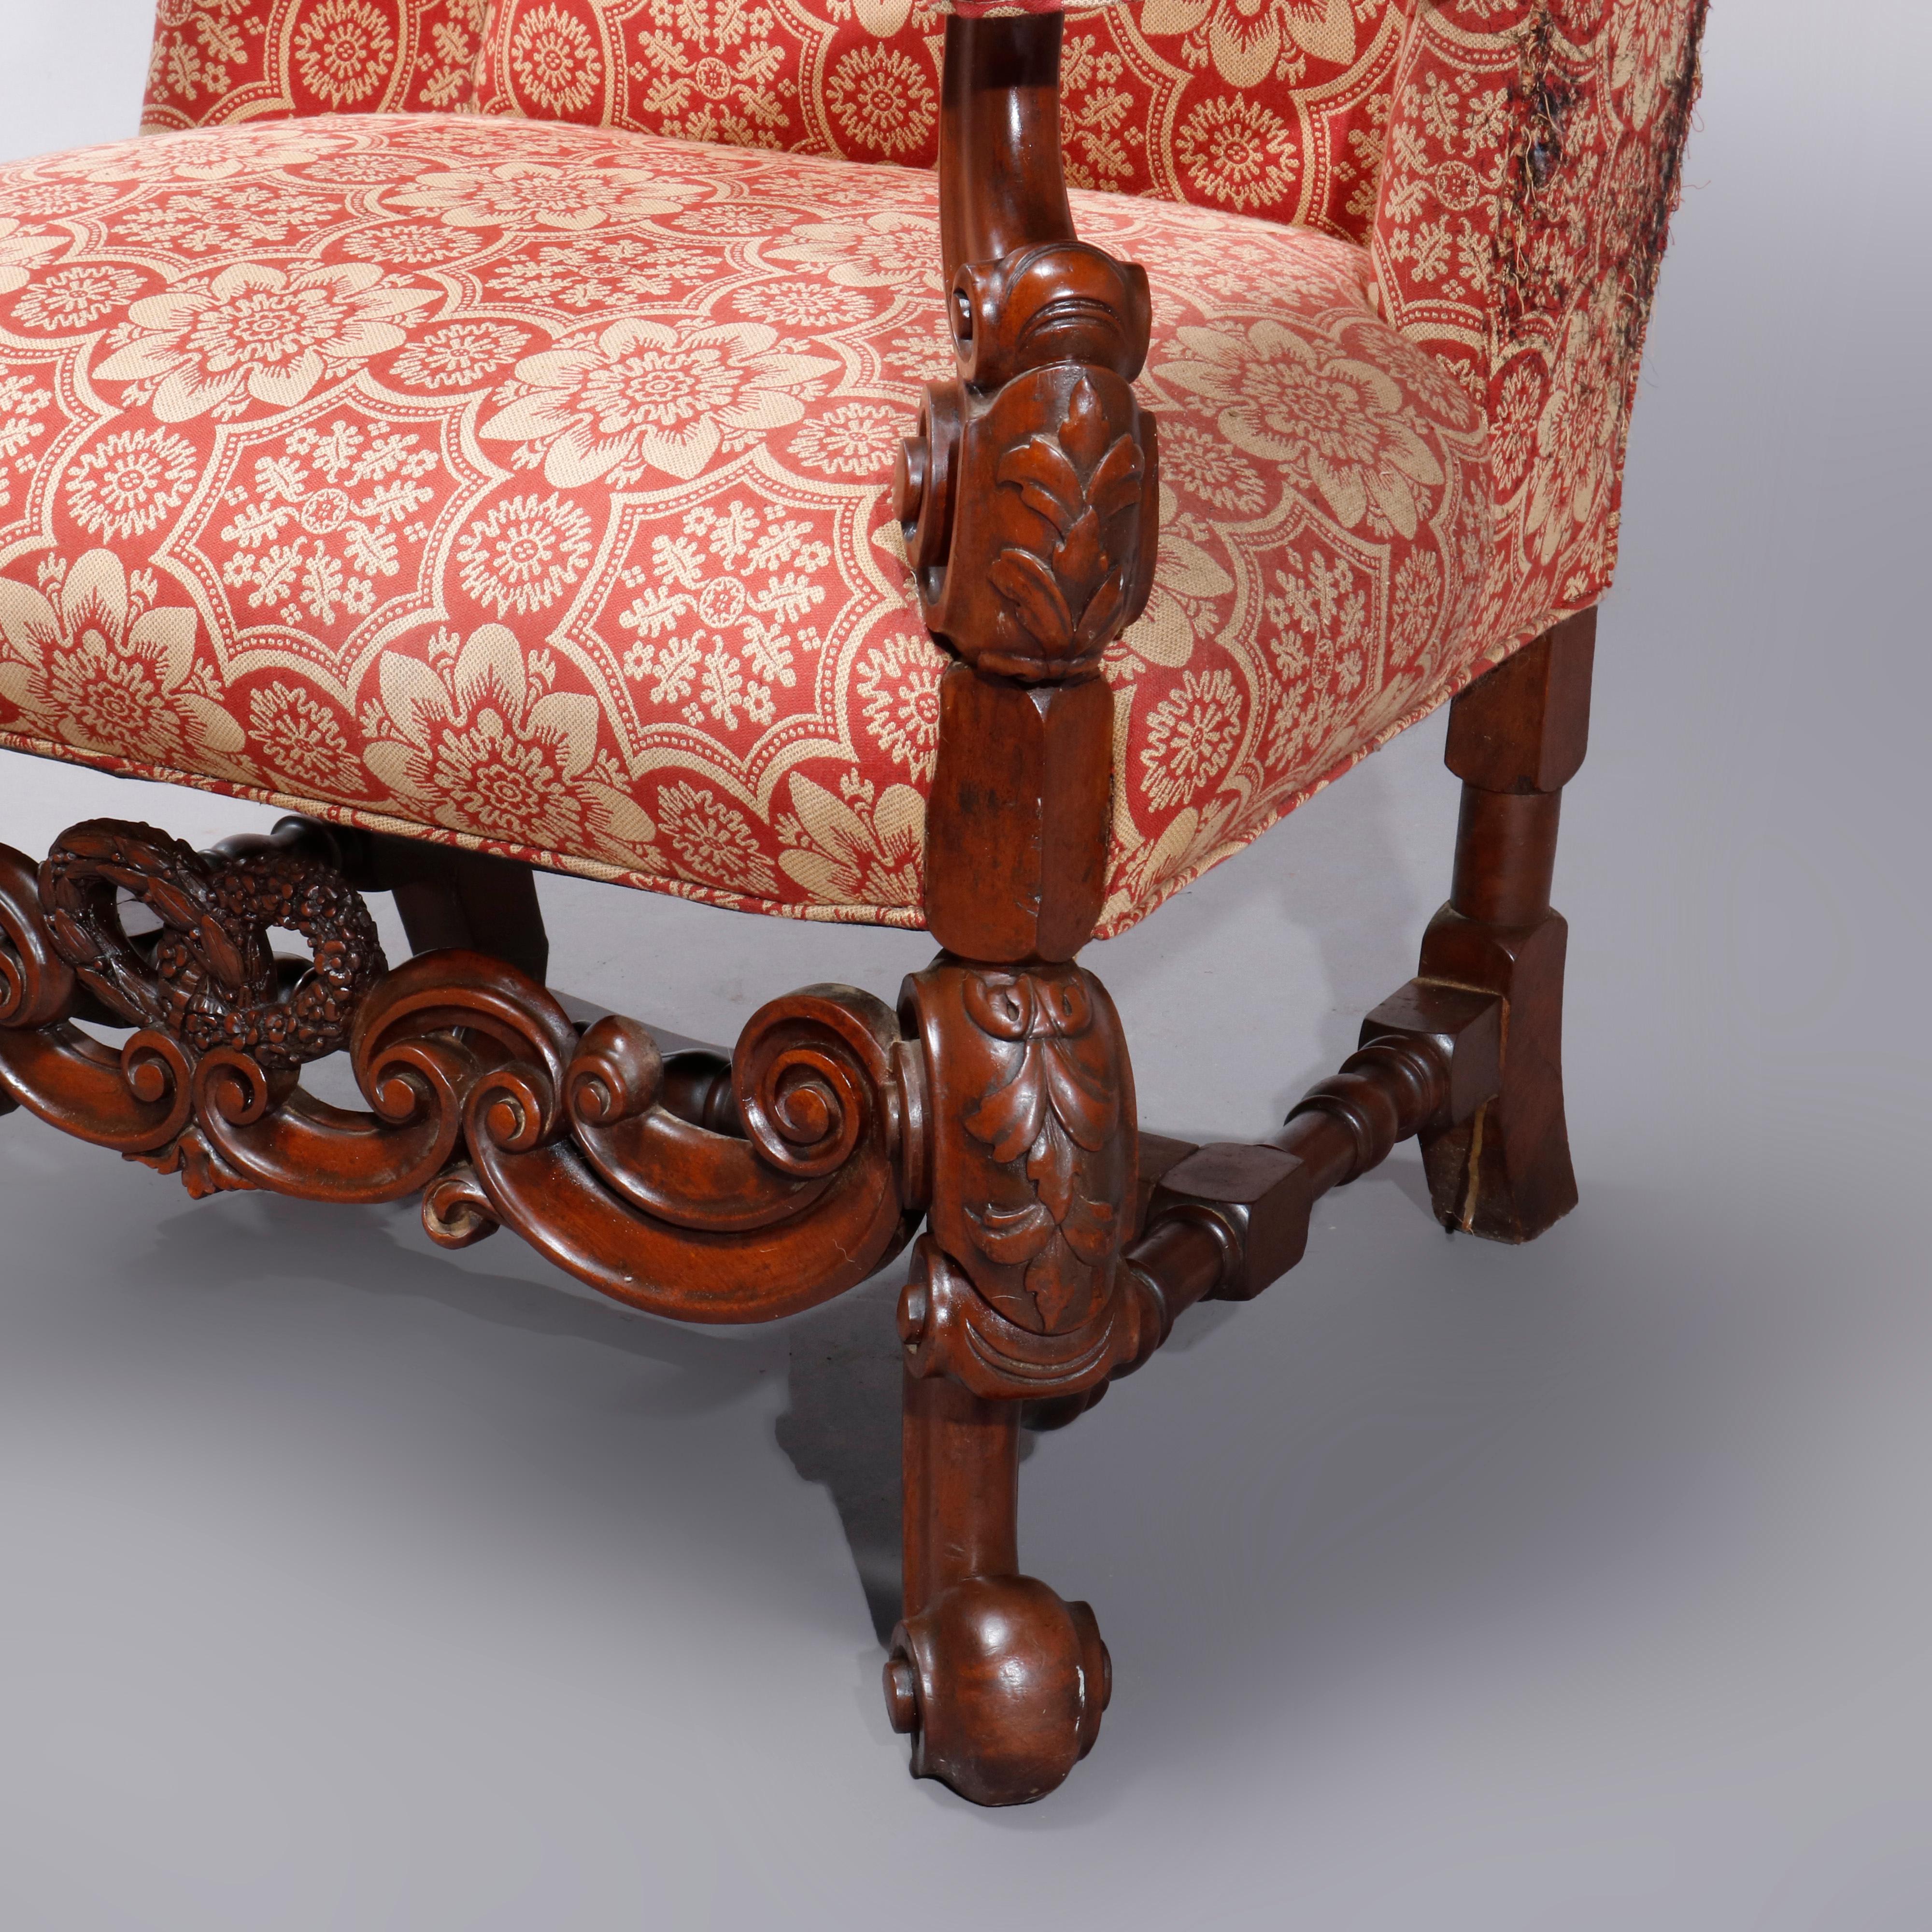 19th Century Antique Carved Walnut Continental Baroque Upholstered Tall Fireside Chairs